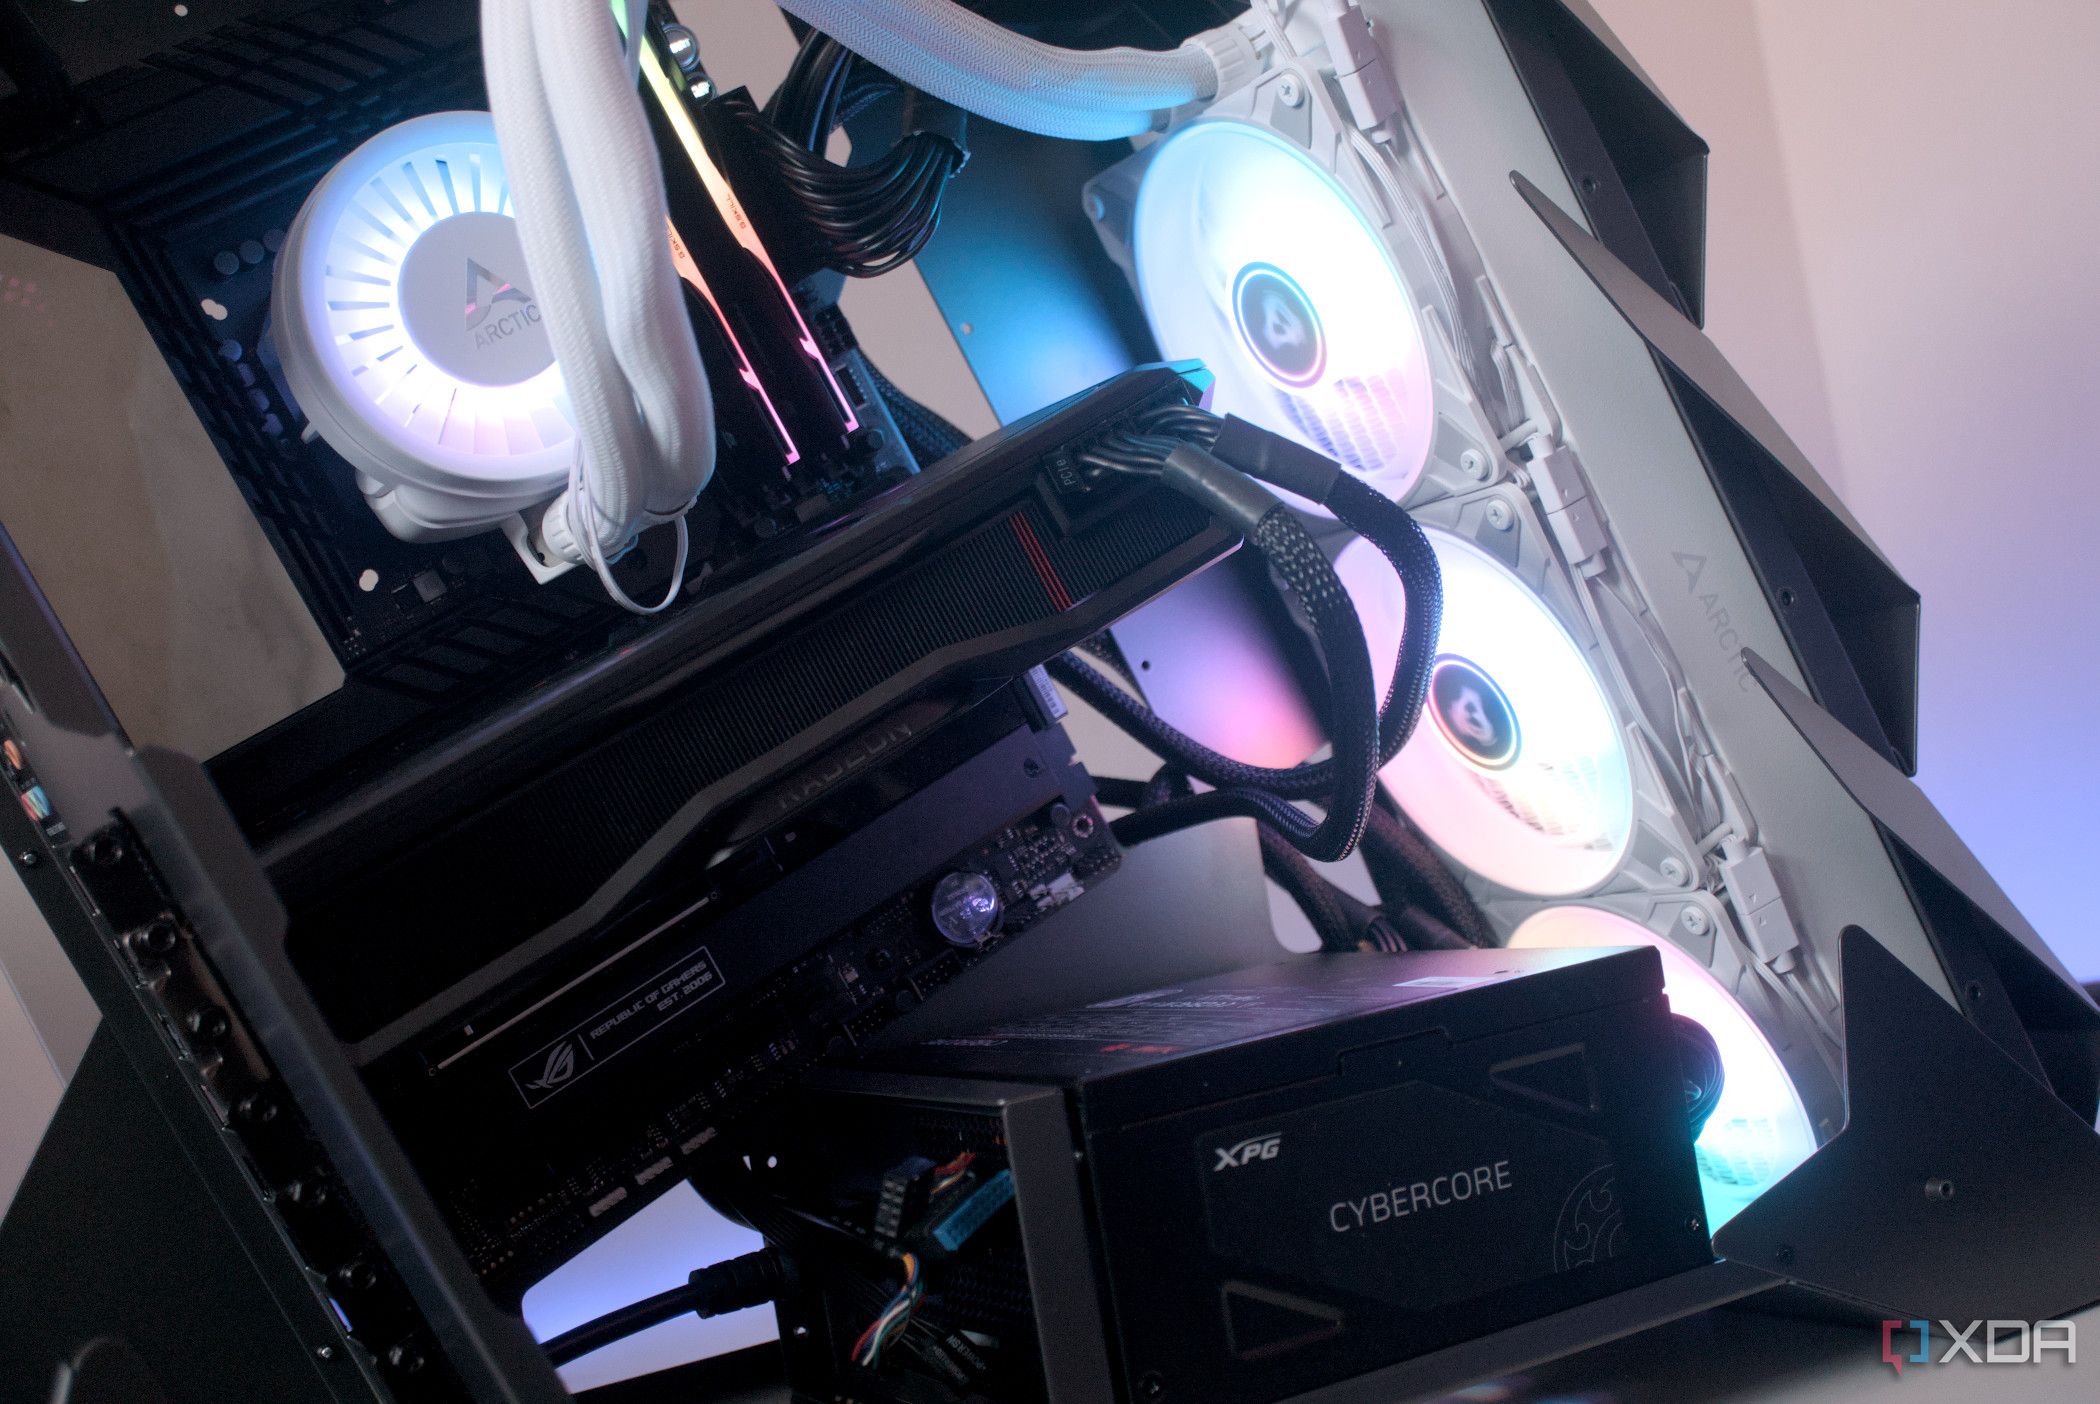 How to build a PC now with future upgrades in mind